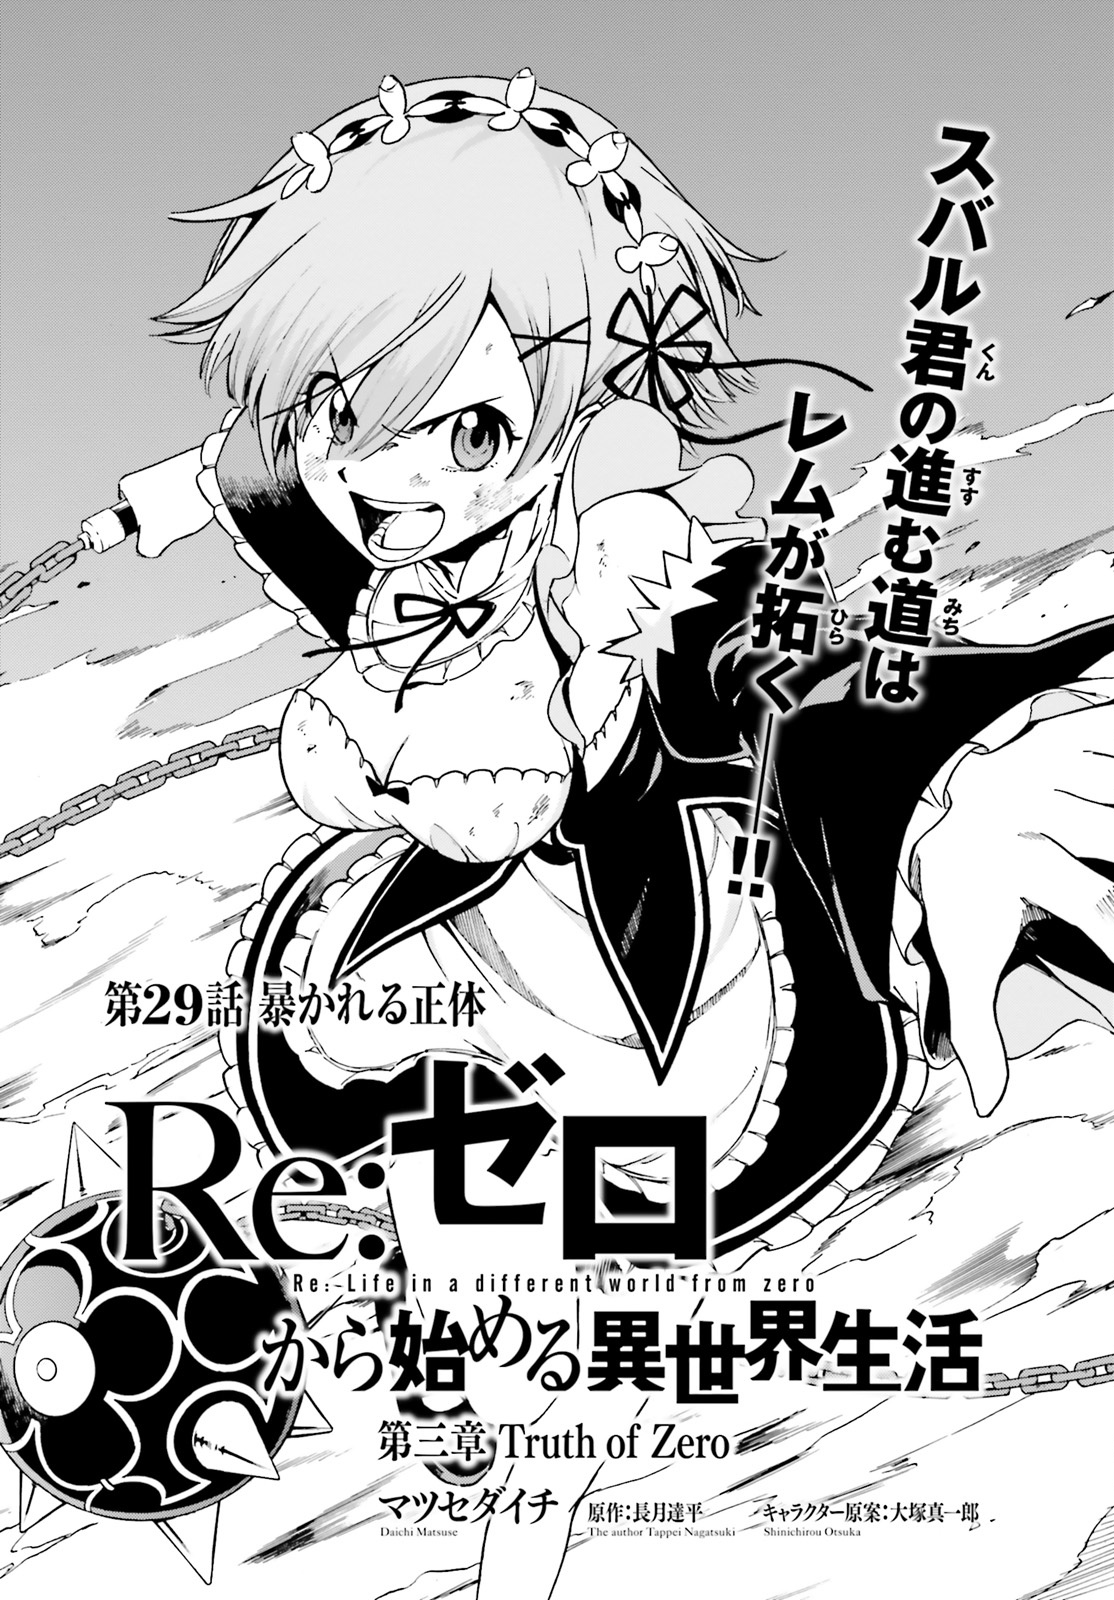 Re:ZERO -Starting Life in Another World- Chapter 3: Truth of Zero